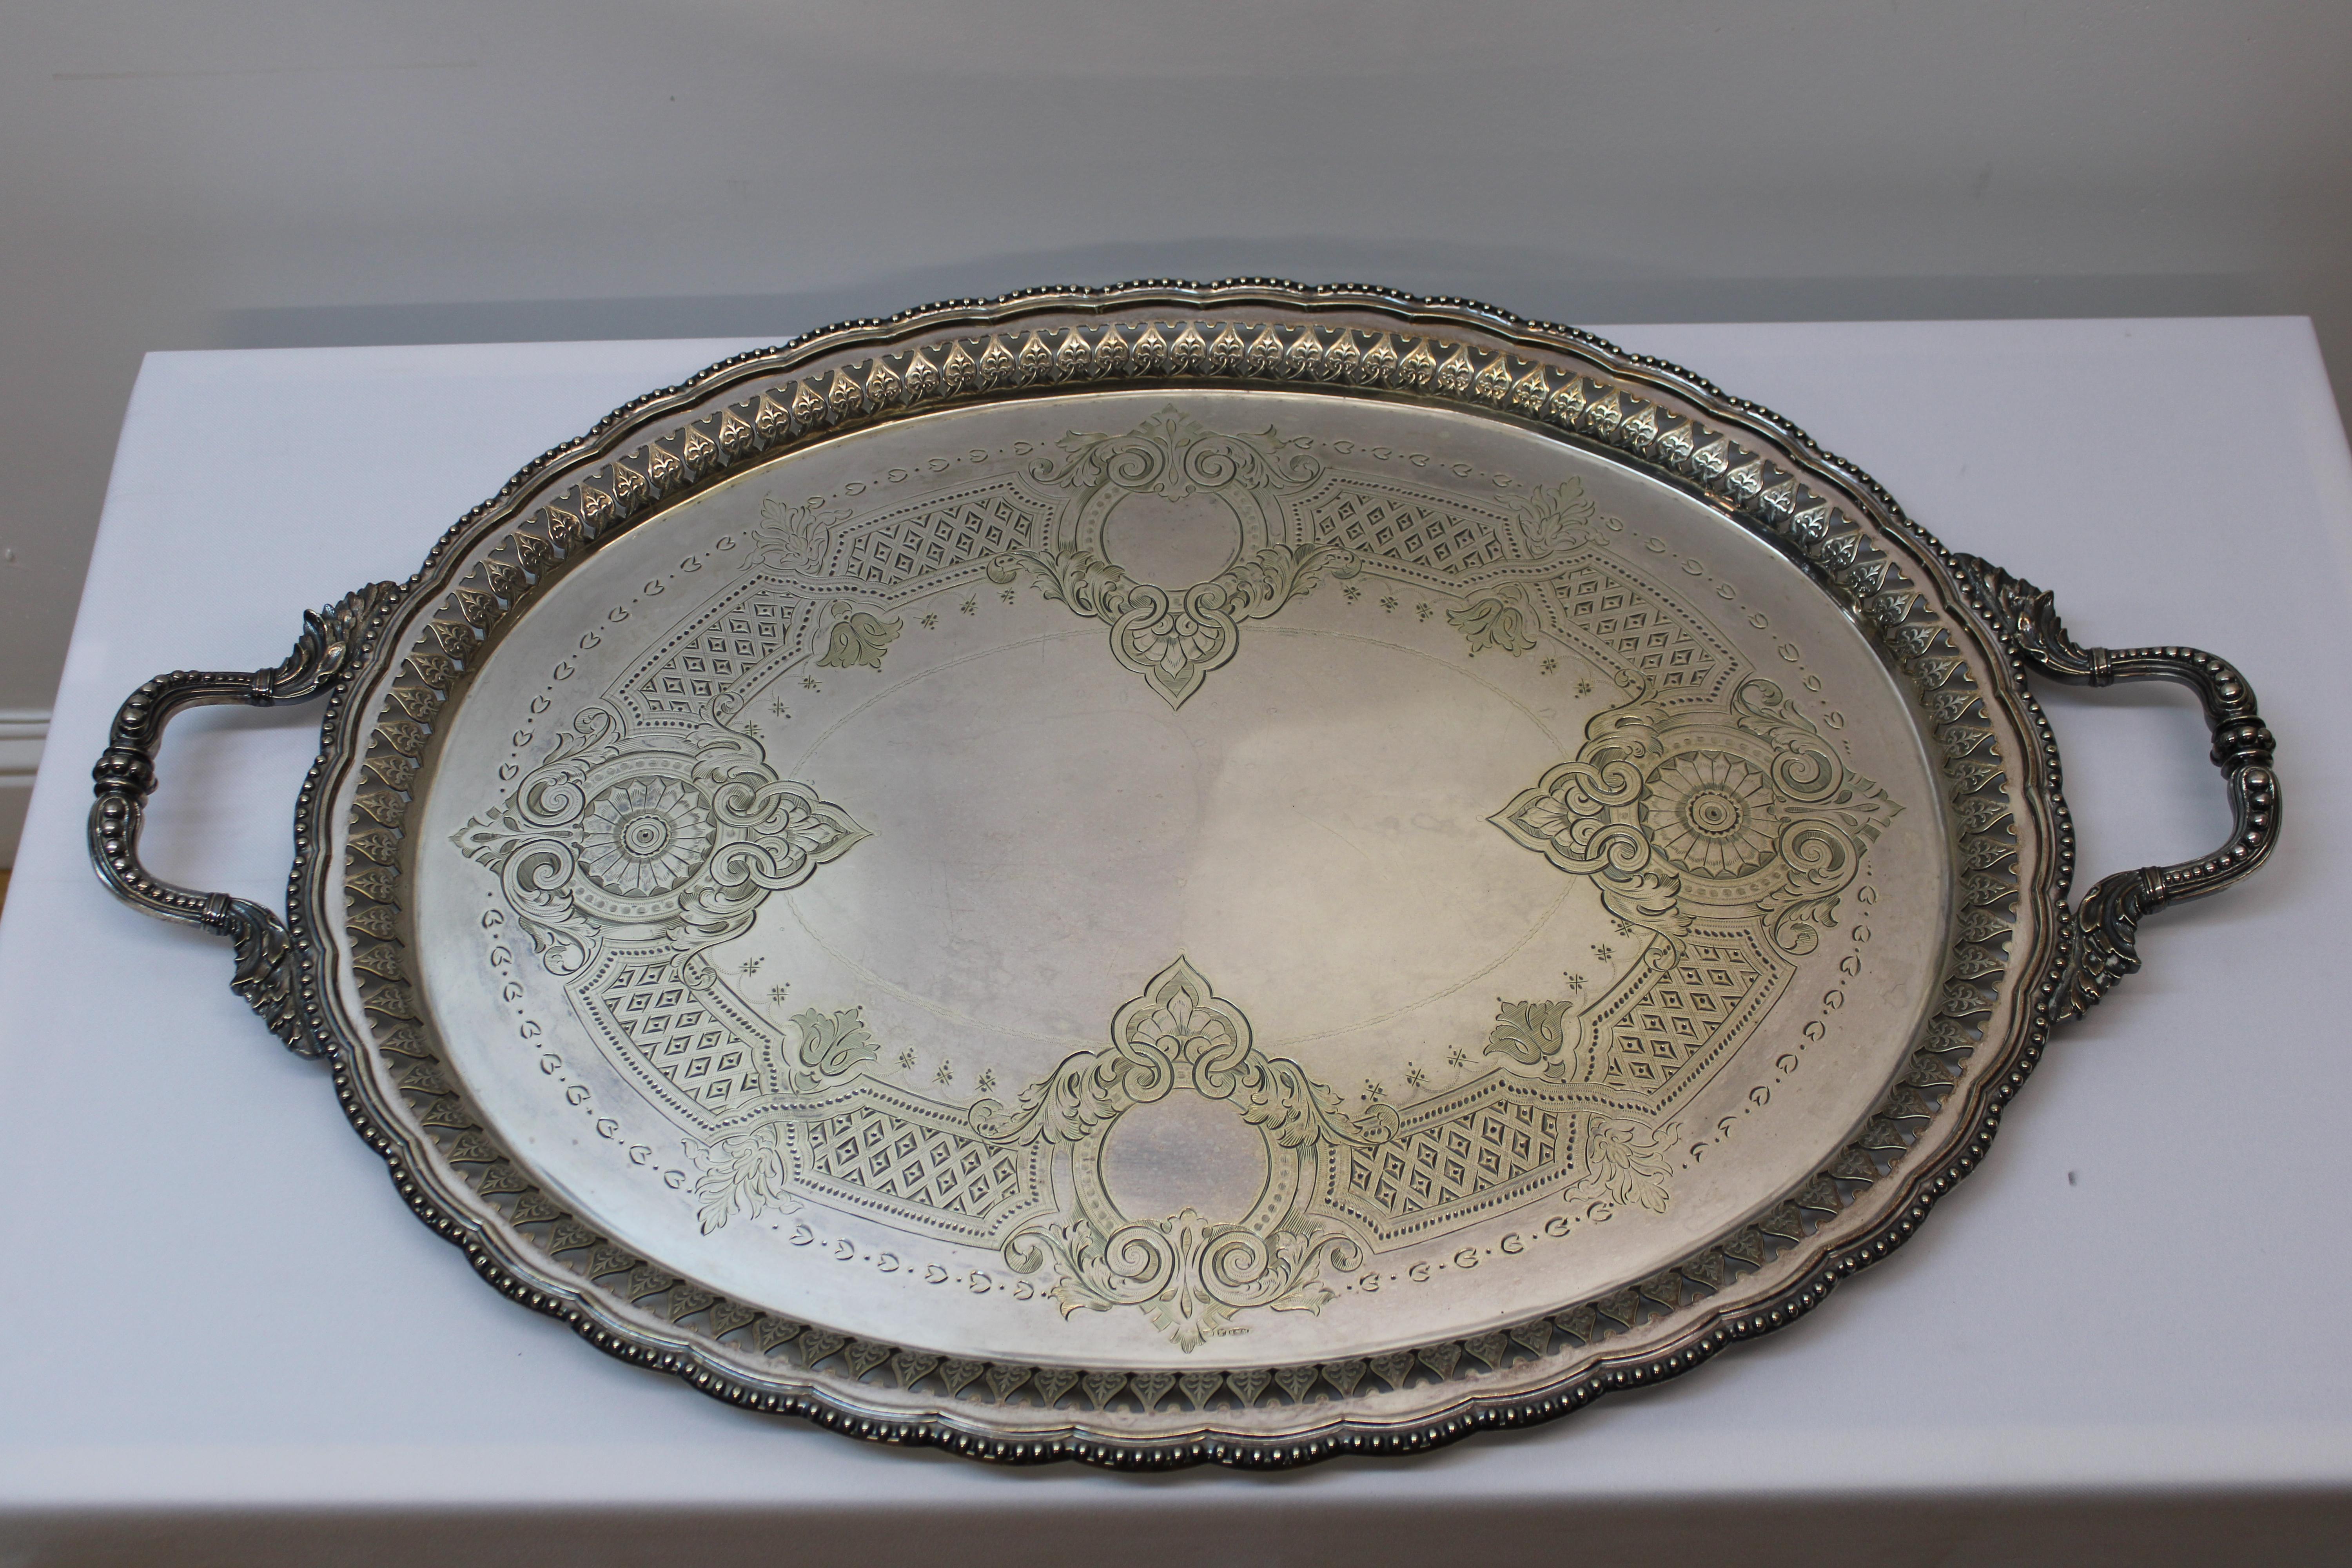 C. late 19th century - early 20th century

Silver plated serving platter.